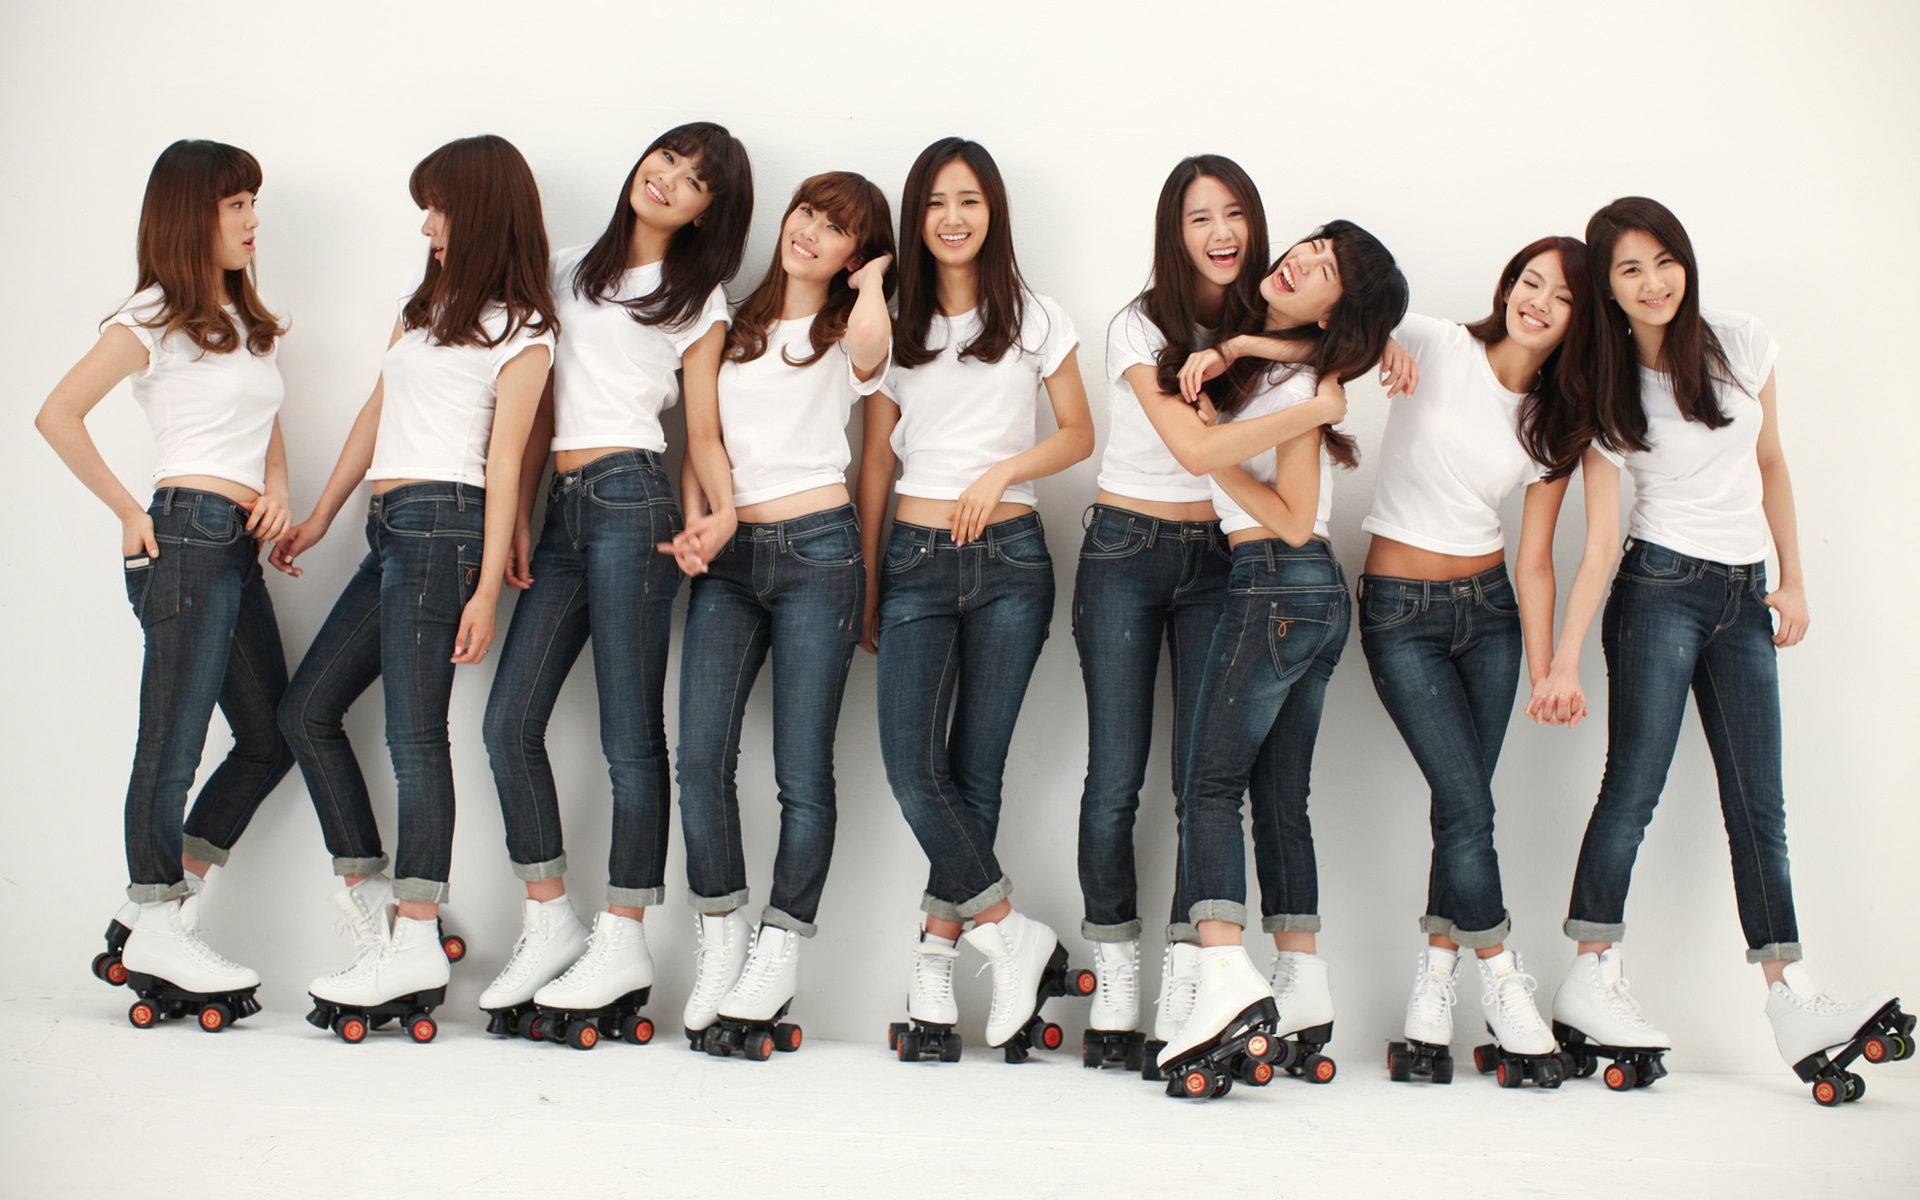 Girls Generation latest HD wallpapers collection #9 - 1920x1200